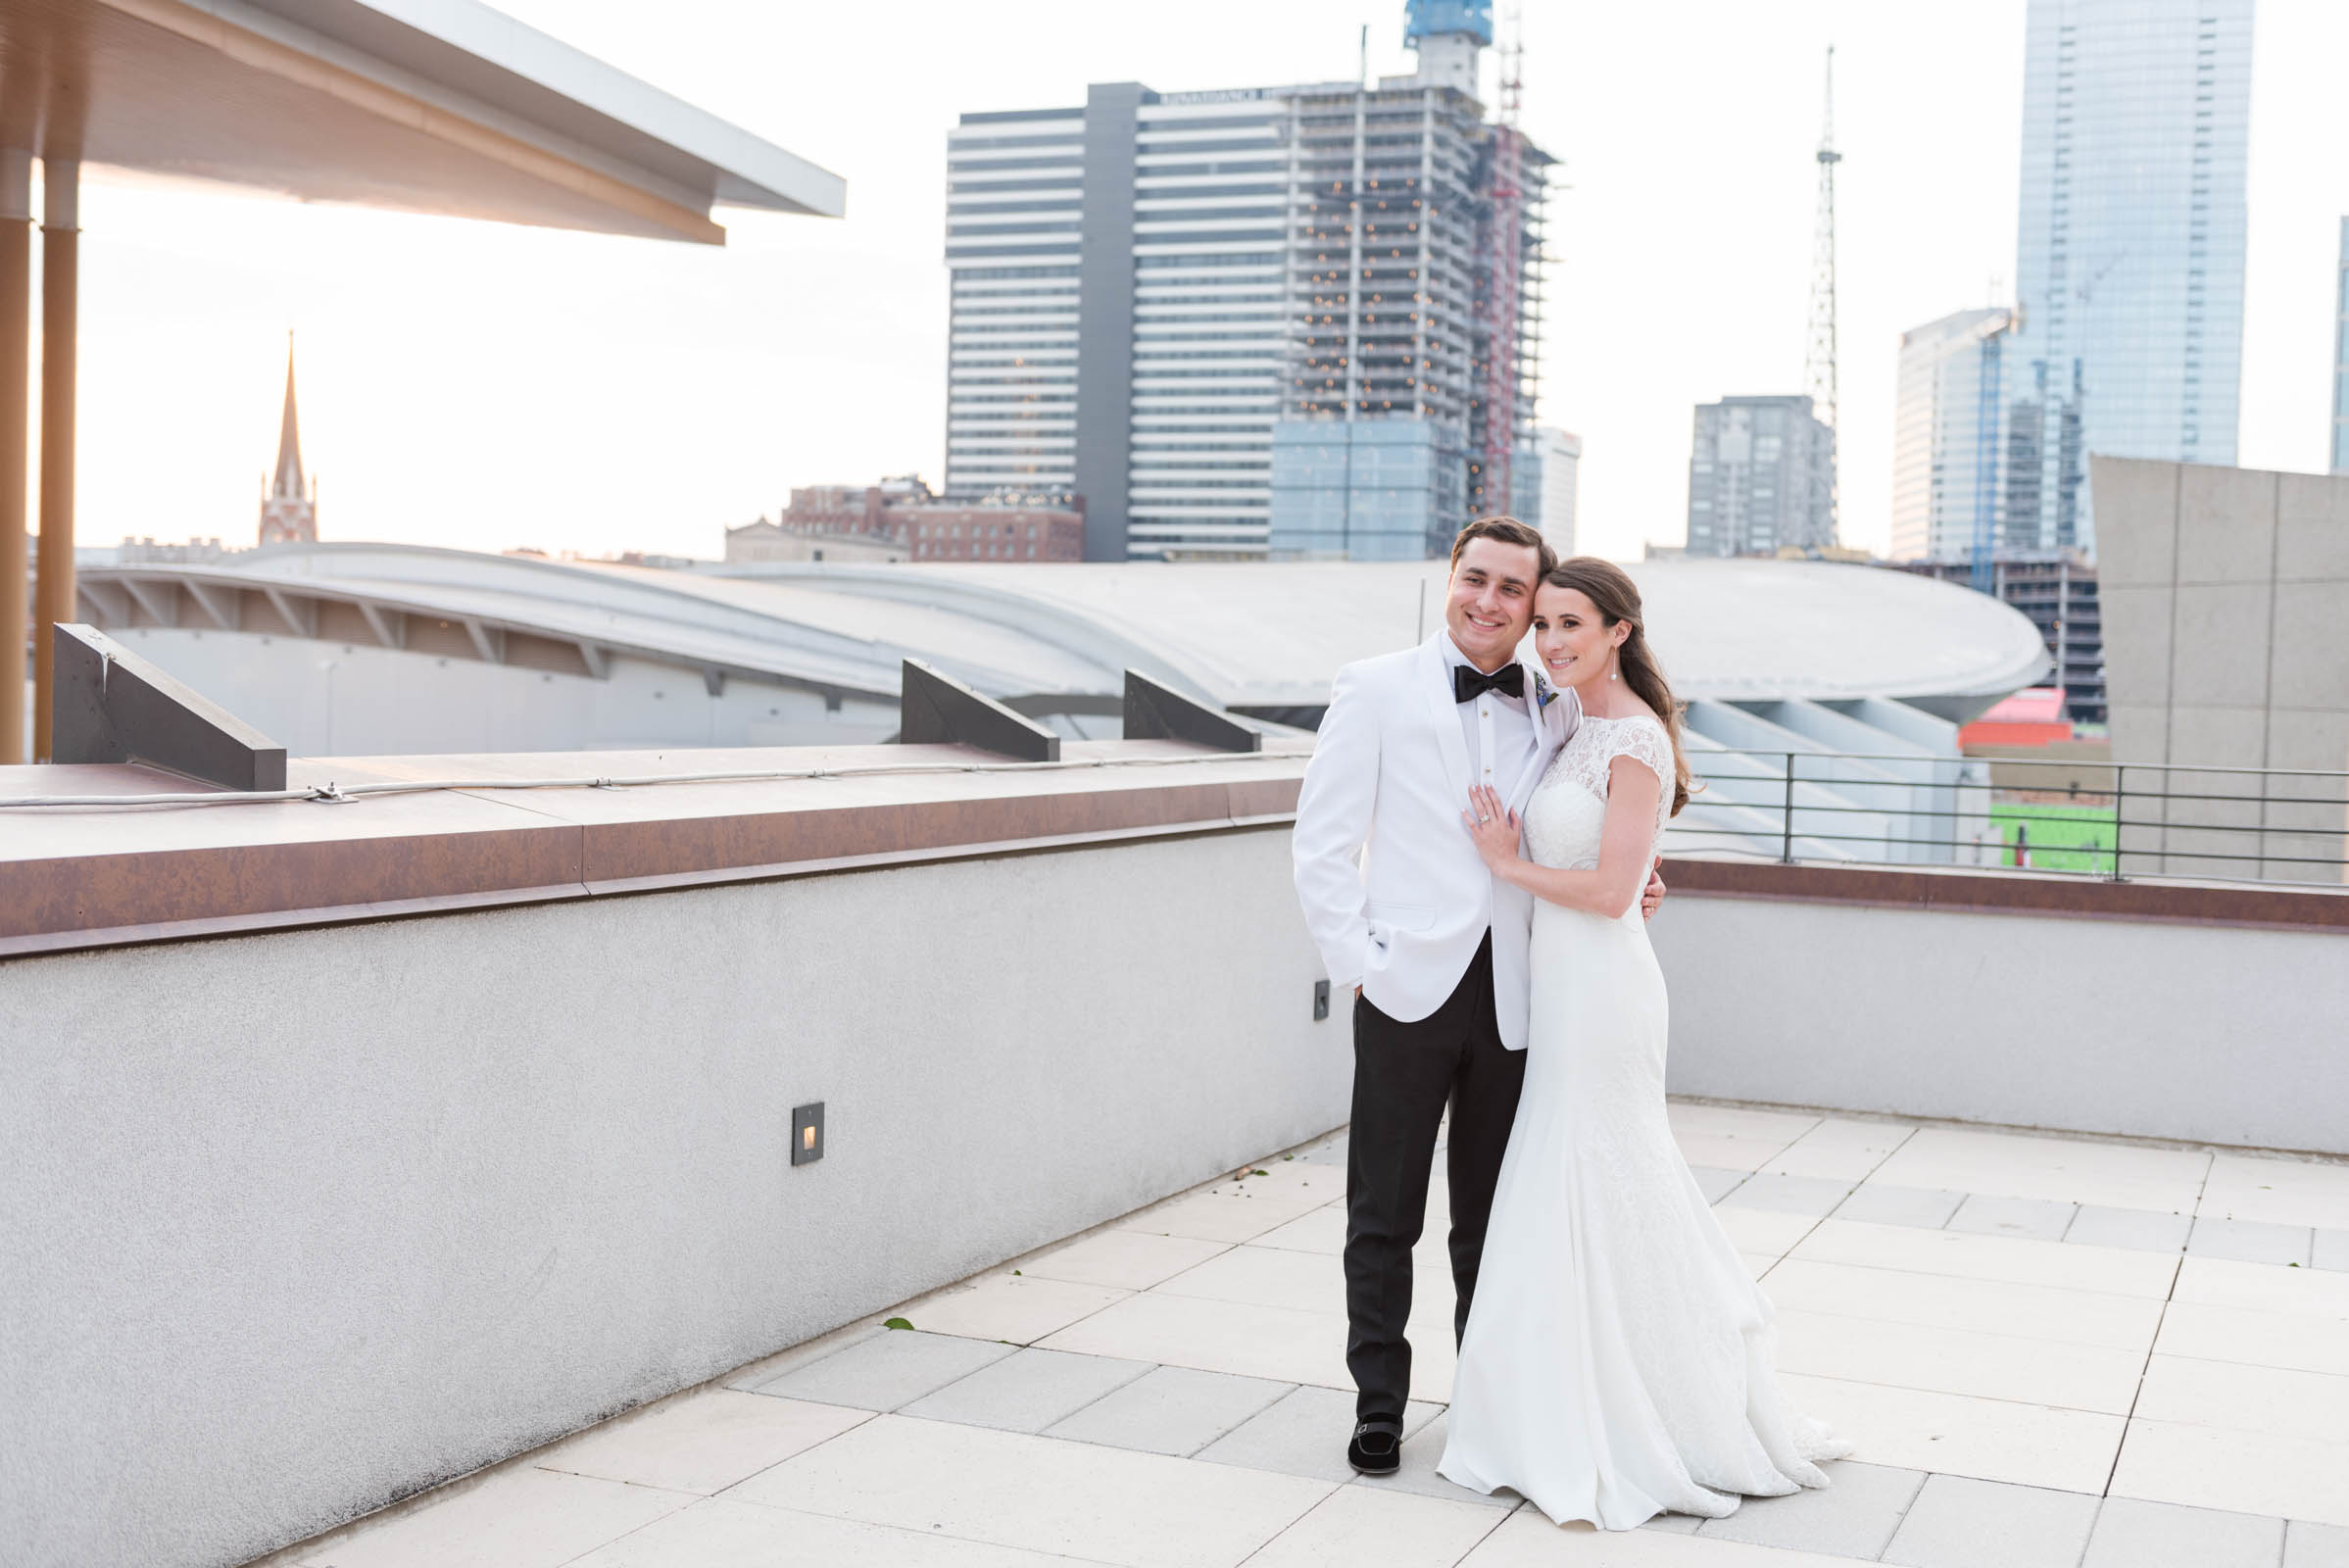 Summer Wedding at the Country Music Hall of Fame, Sweet Williams Photography, Wedding and Portrait Photographer in Nashville Tennessee